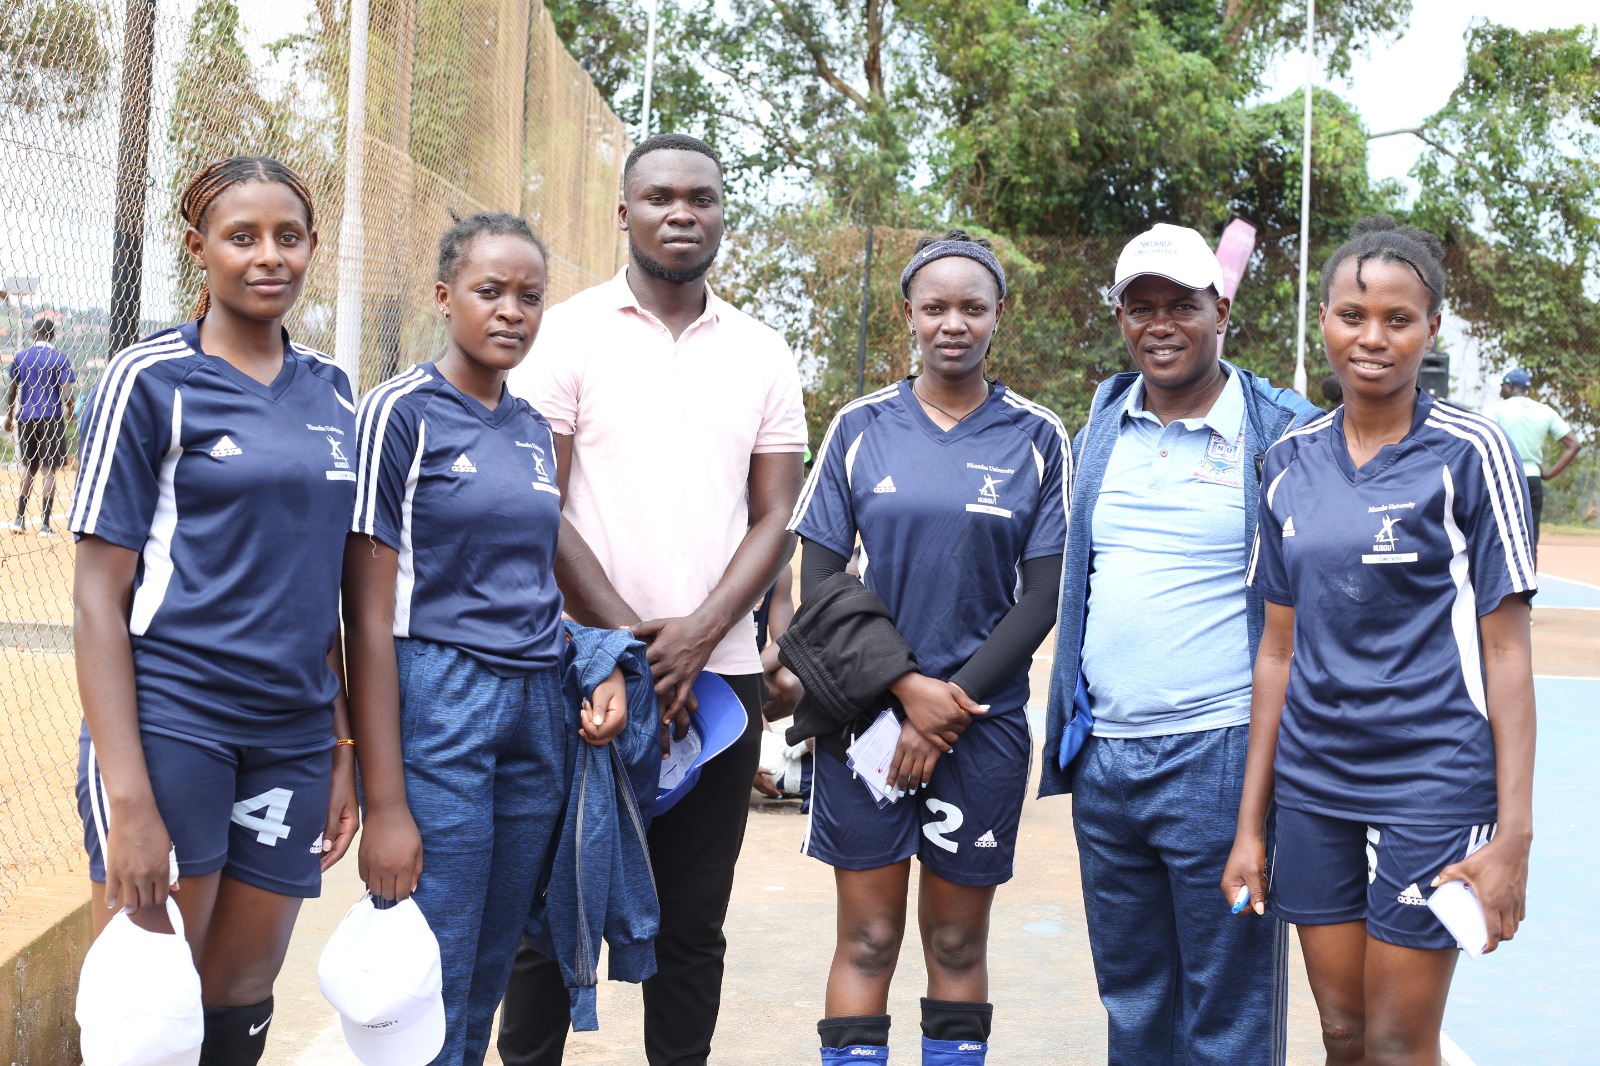 Prof. Jude Lubega with the Volleyball team moments after a lossto UCU